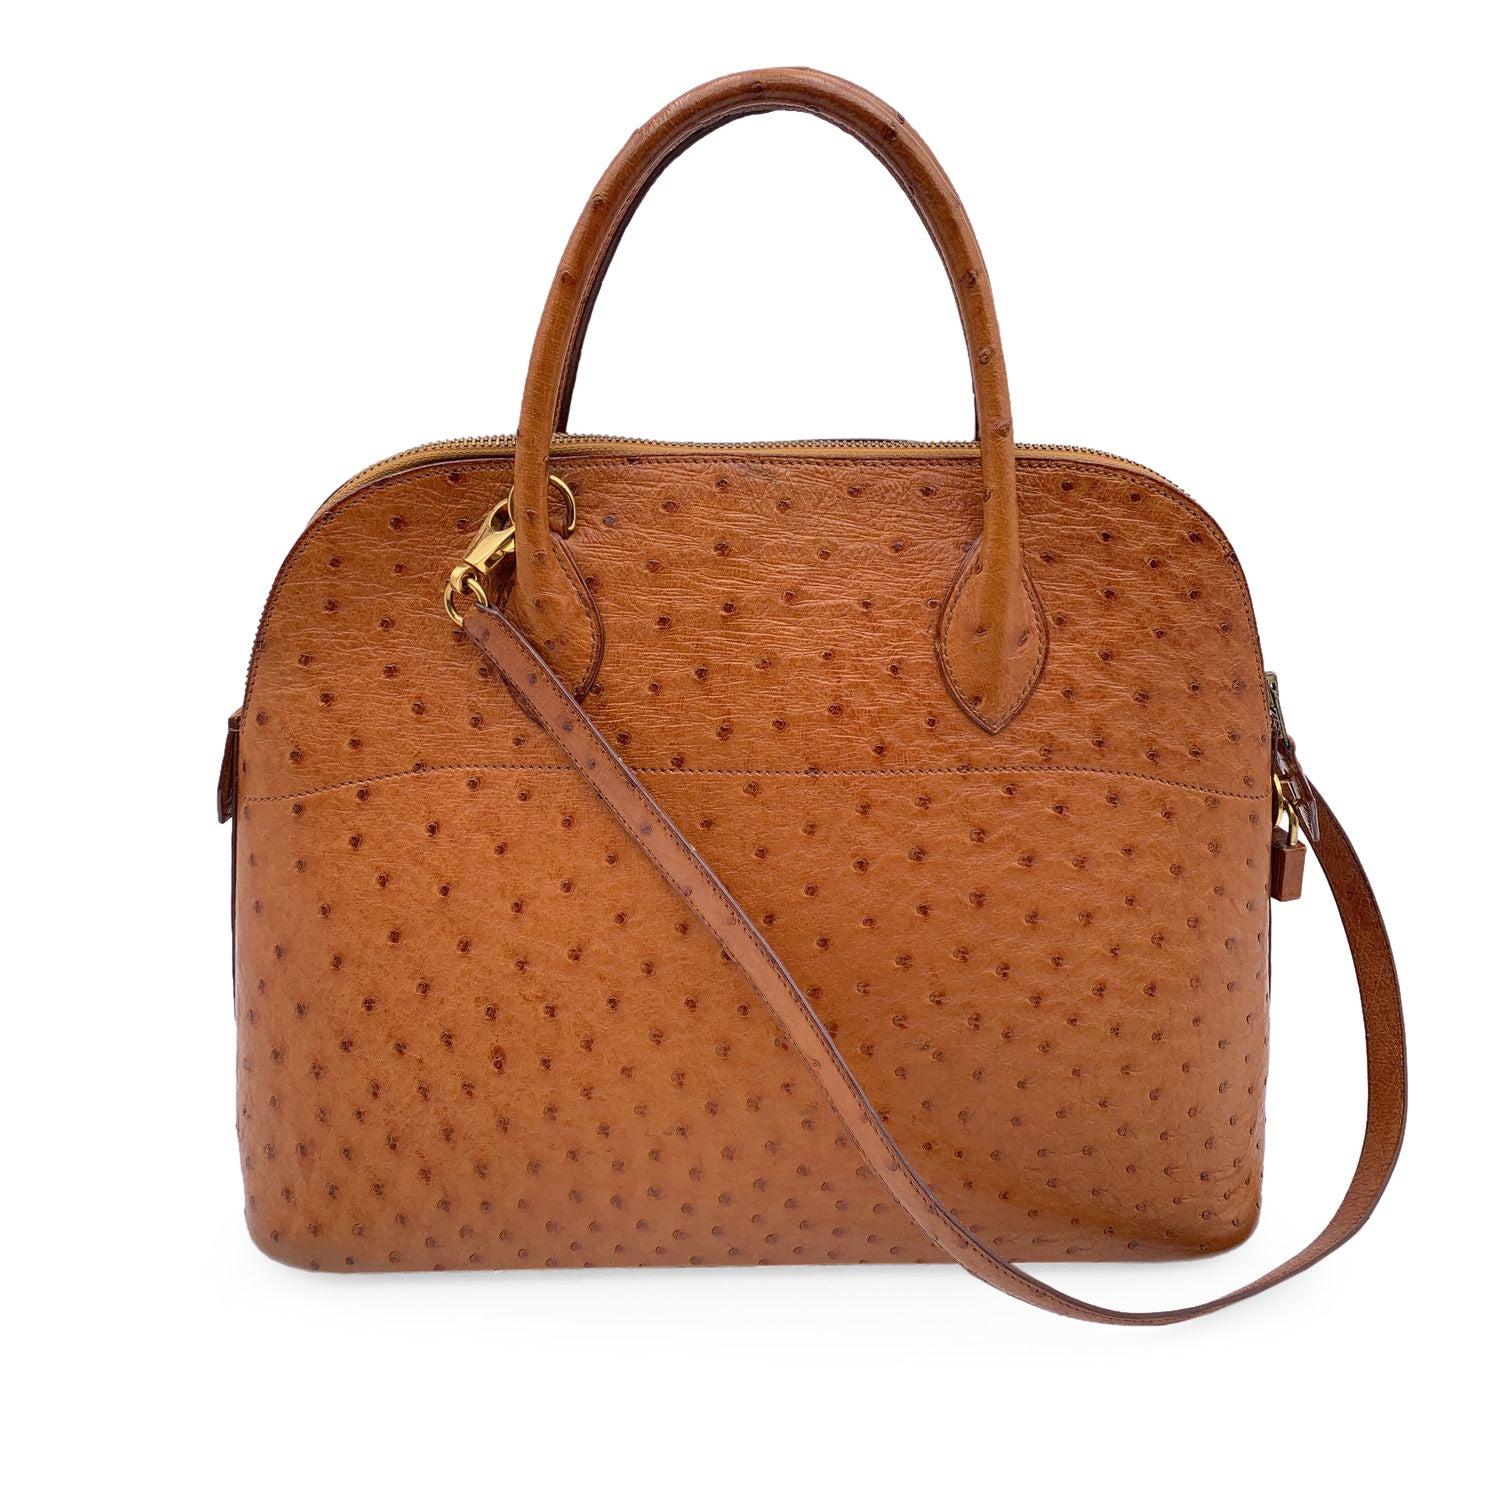 Sophisticated and timeless Hermes BOLIDE BAG crafted in tan ostrich leather from the 1992 (blind stamp is 'V' encased in a circle). It features a doomed top with double top rolled leather handles and removable shoulder strap. Upper zipper closure.